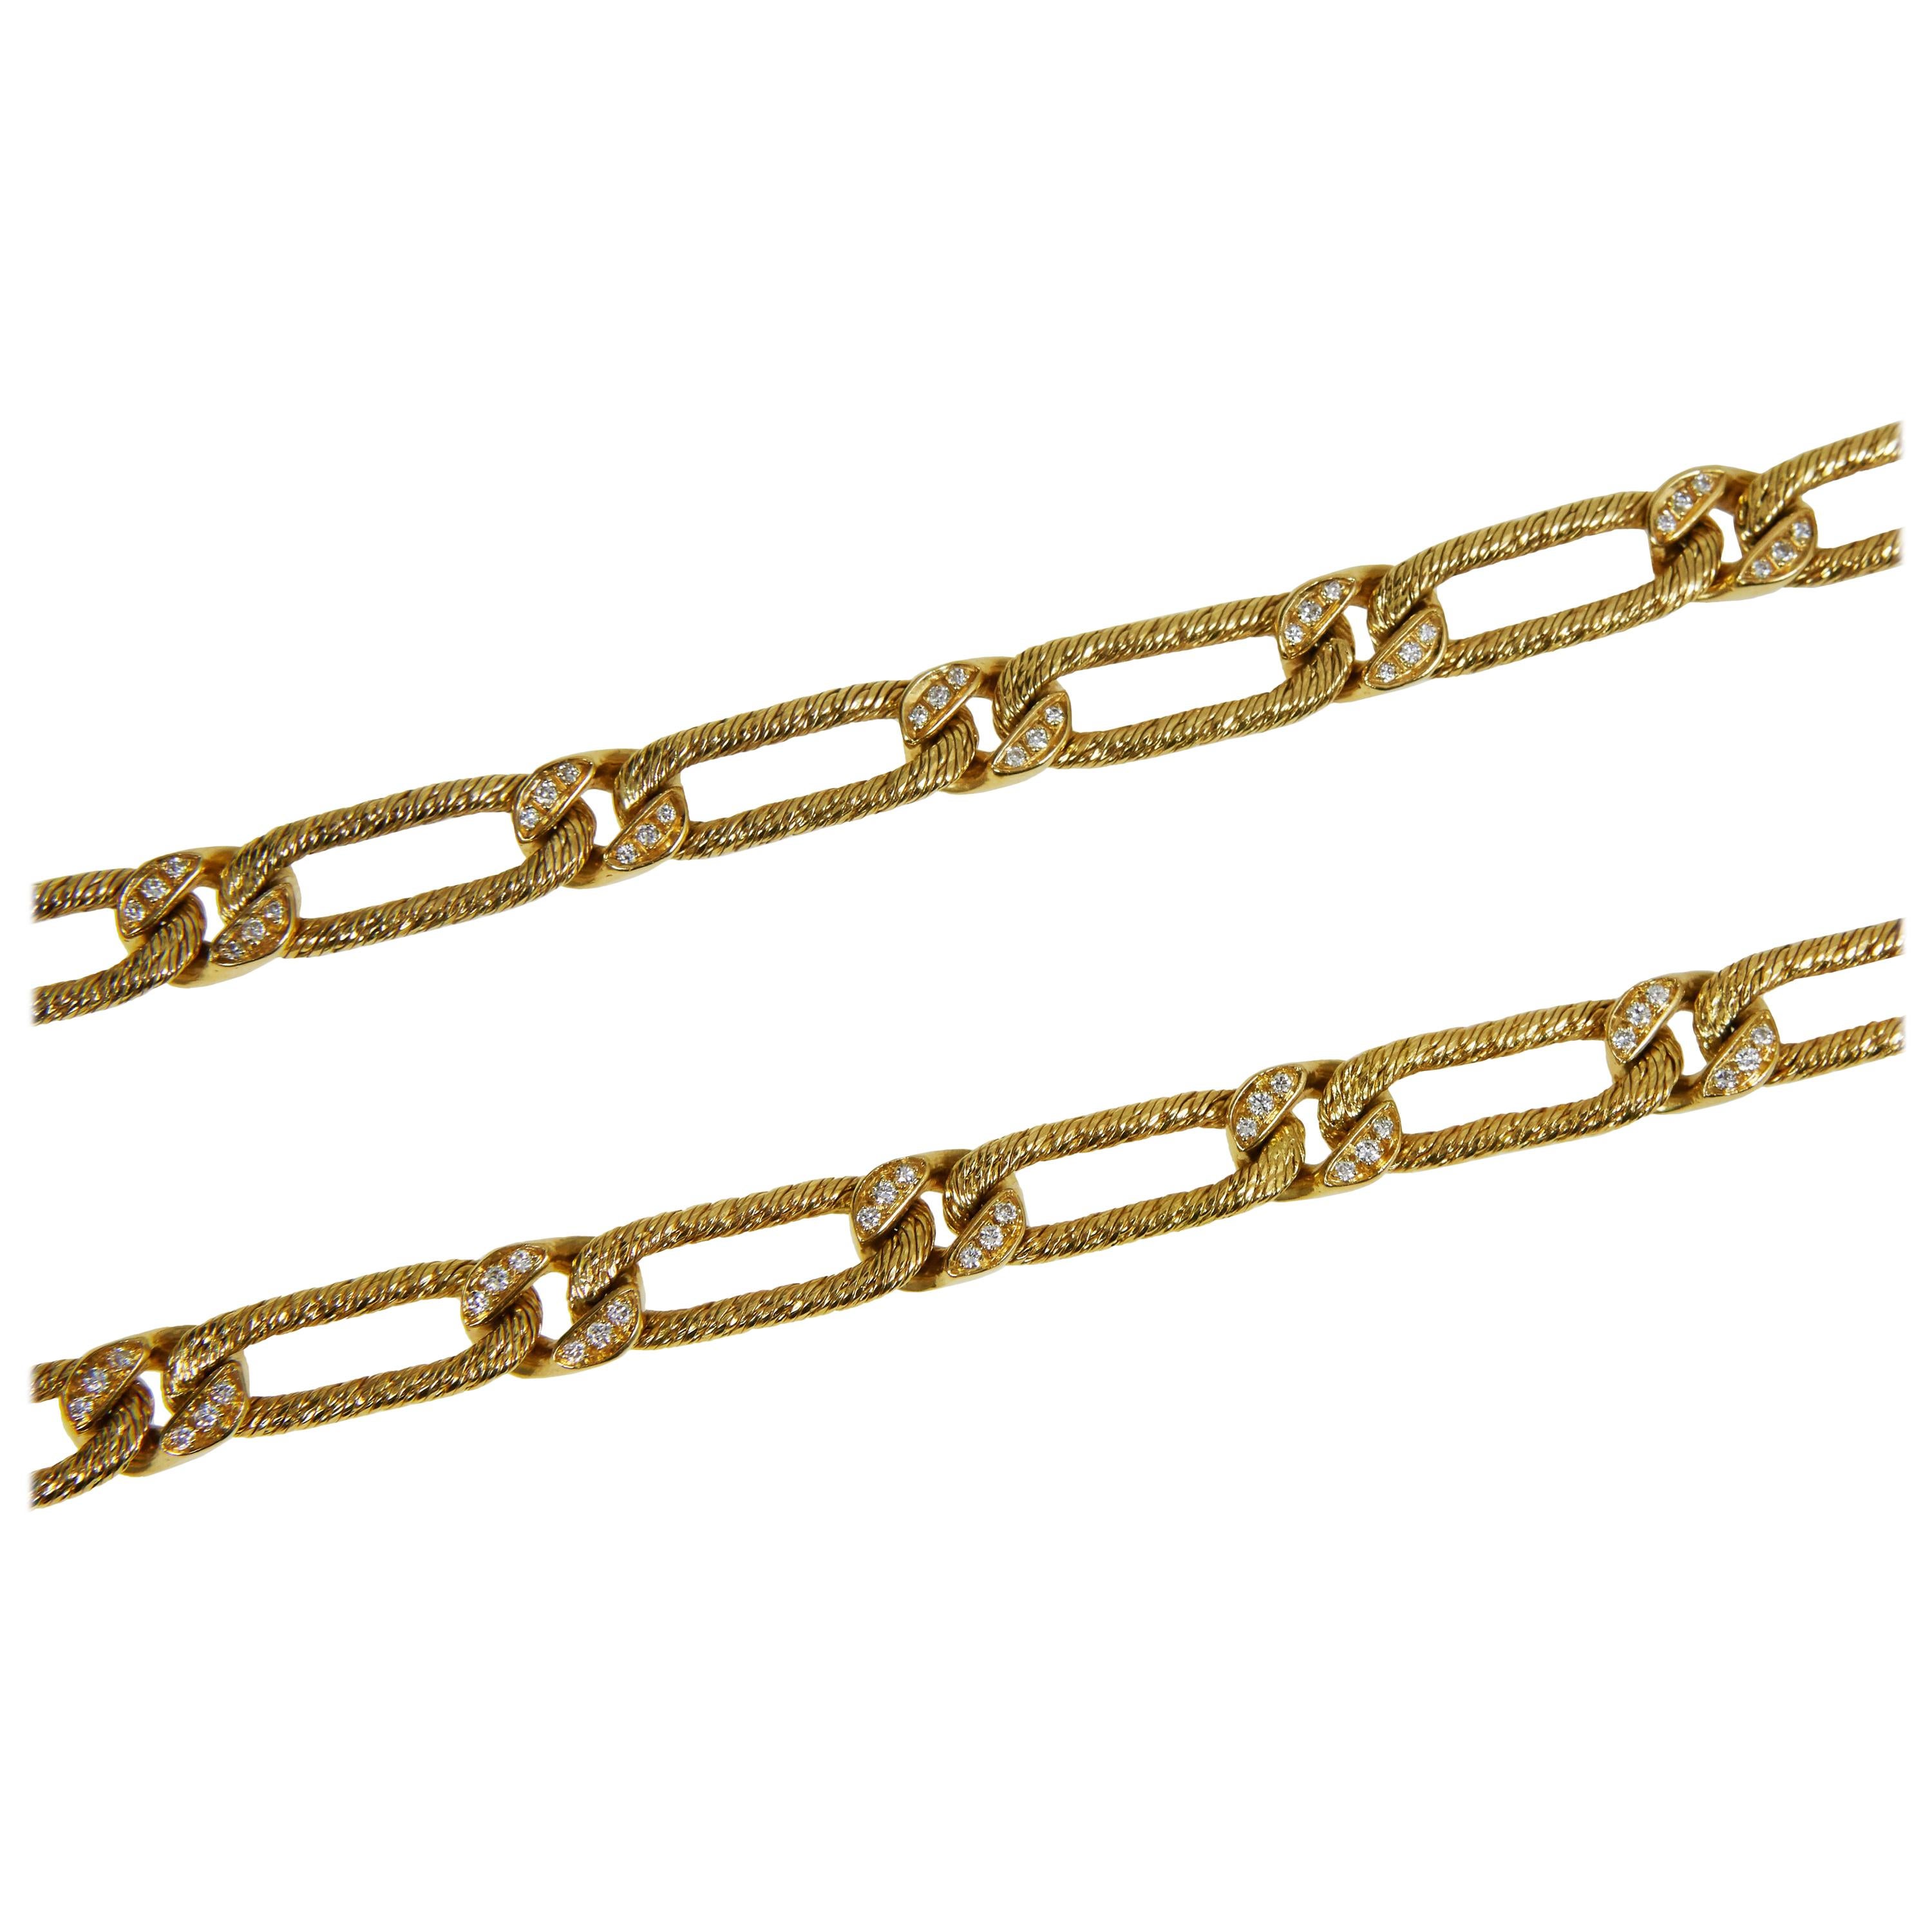 A diamond and braided 18 karat gold chain, with detachable bracelet, by master goldsmiths - and renowned chain makers - Georges L'enfant for Fred Paris, c. 1960

The chain is signed 'Fred' with maker's marks for Georges L'enfant and French